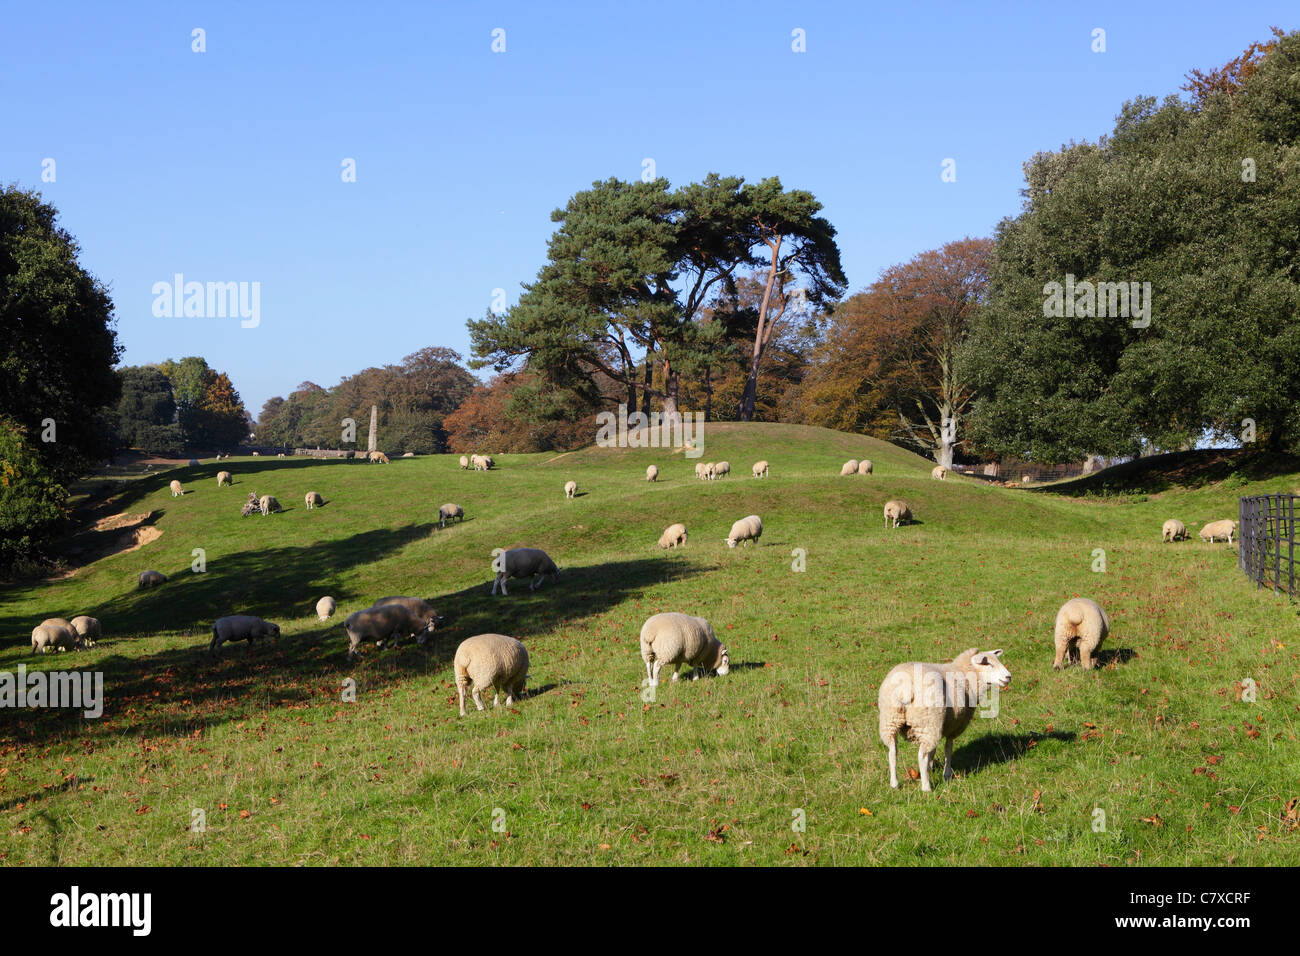 Pastoral scene of sheep grazing in English countryside, Winchelsea, East Sussex, England, UK, GB Stock Photo